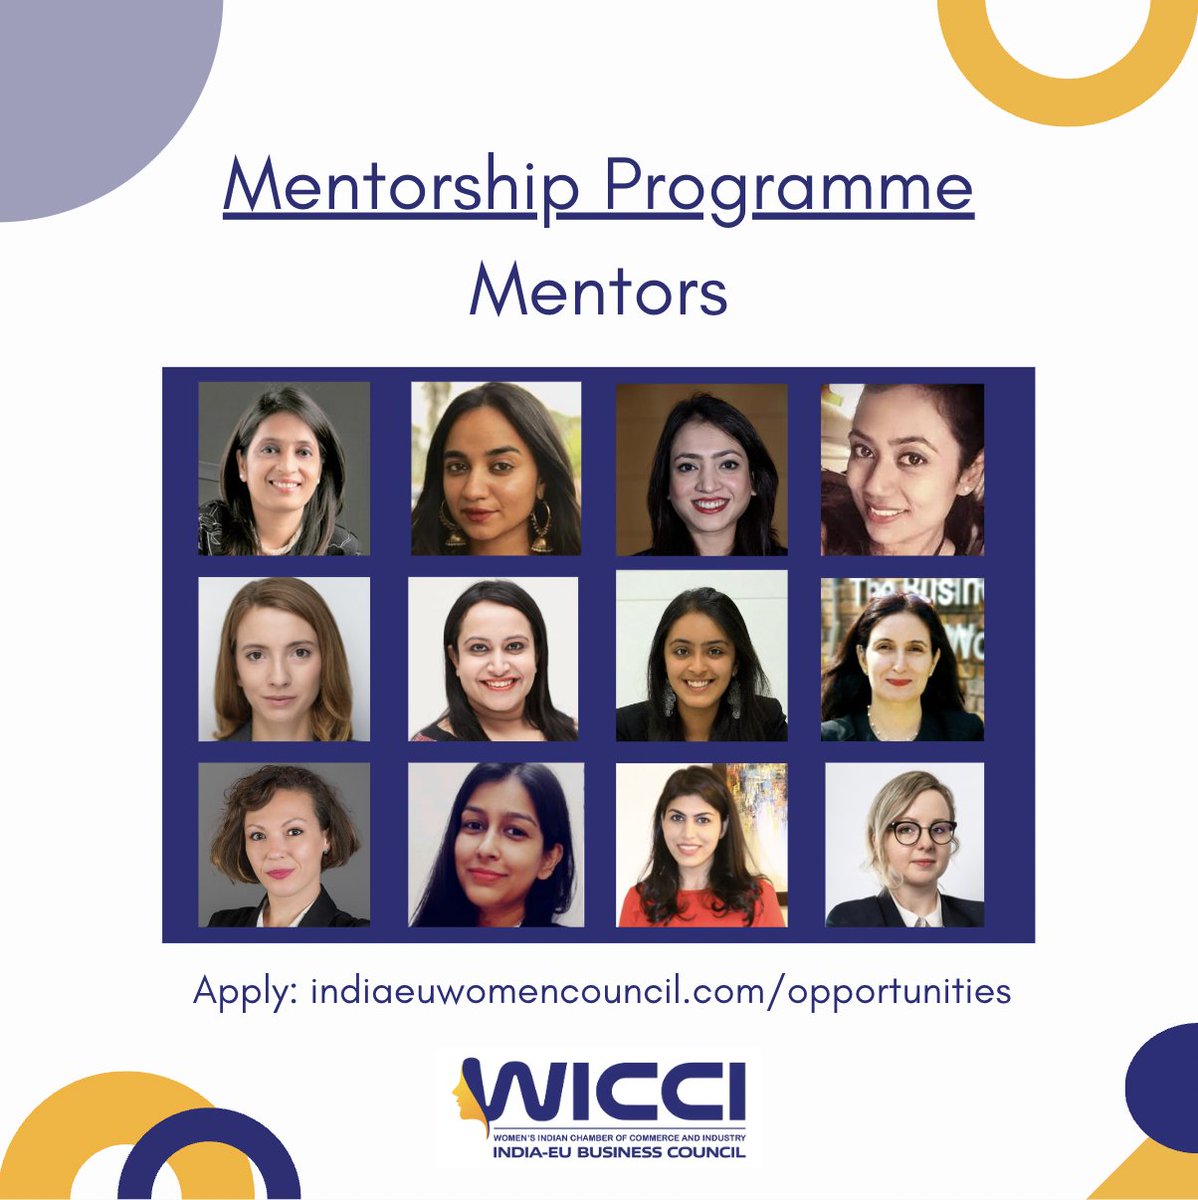 Meet our incredible line-up of 12 mentors for the 2nd edition of the Mentorship Programme in the #India-#EU Business Corridor! Apply now and take your career to new heights 🚀 #indiaeuwomen #IndiaEUBinder #womeninbusiness #womenempowerment #womeninspiringwomen #wicci